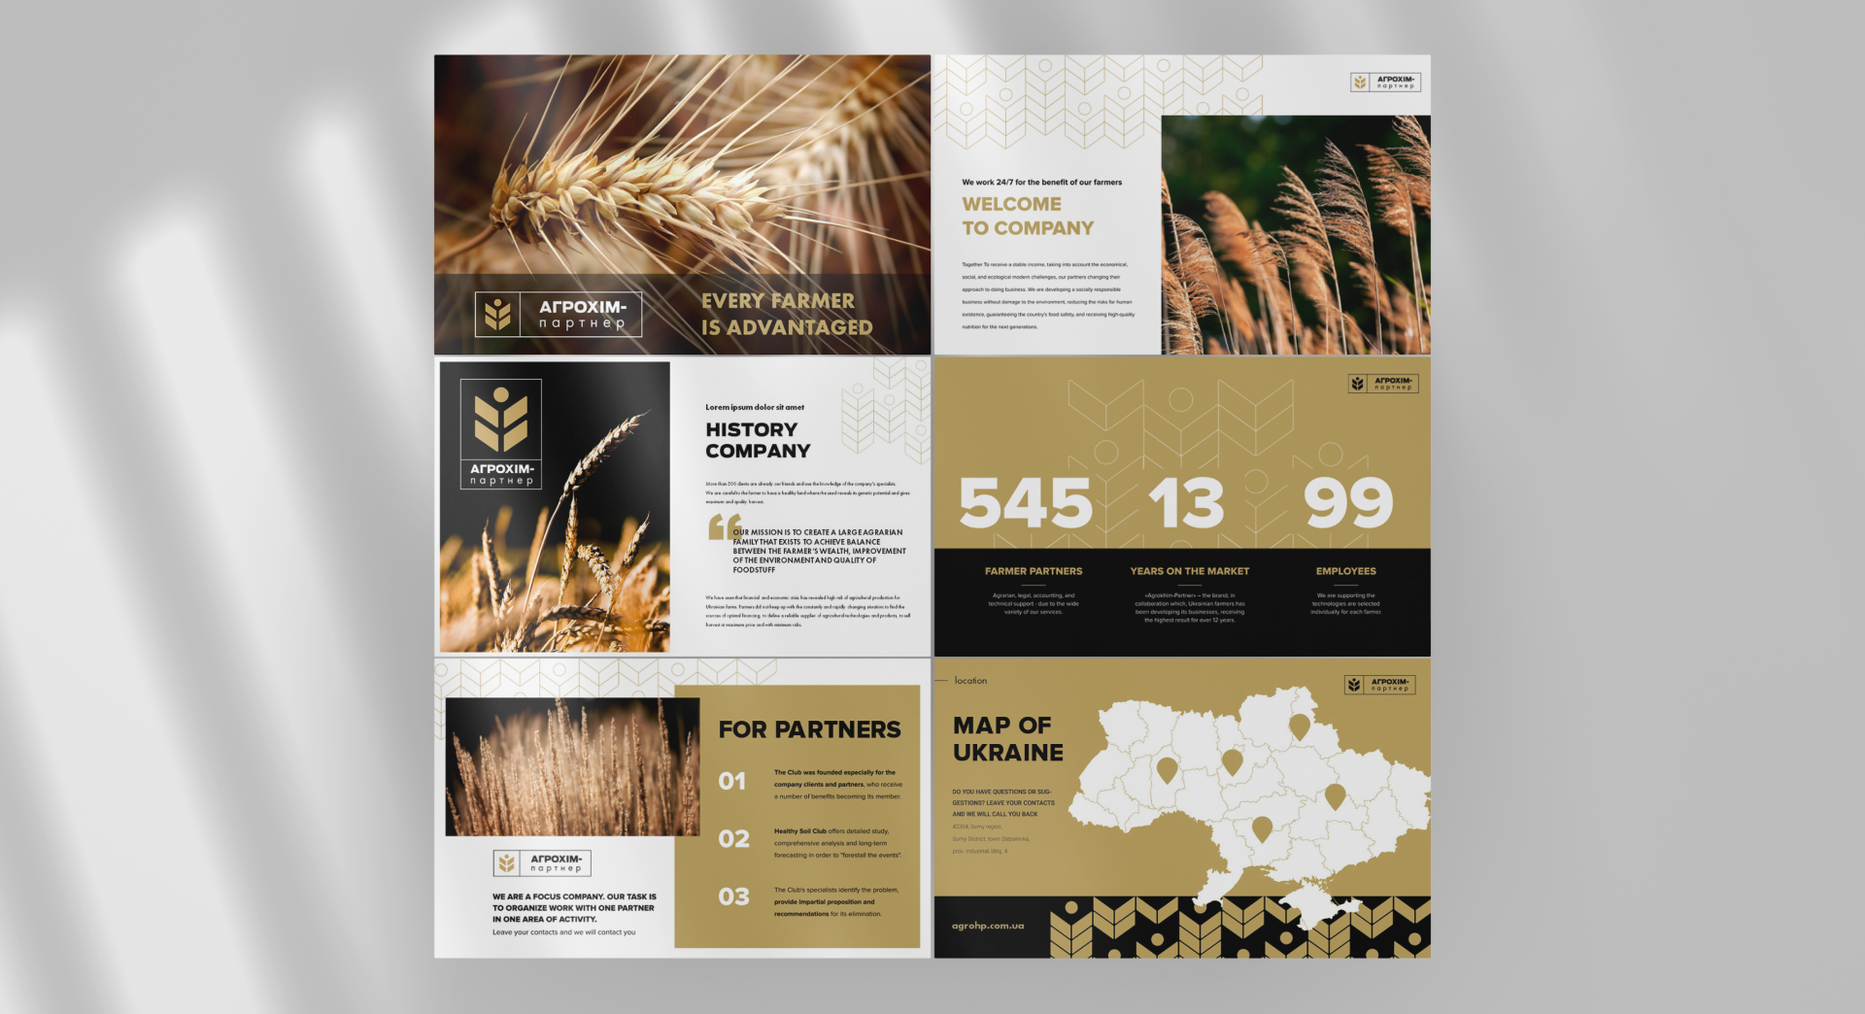 Rebranding of the agricultural company “Agrokhim-Partner”: communication strategy, logo, pattern, corporate style, and website — Rubarb - Image - 15